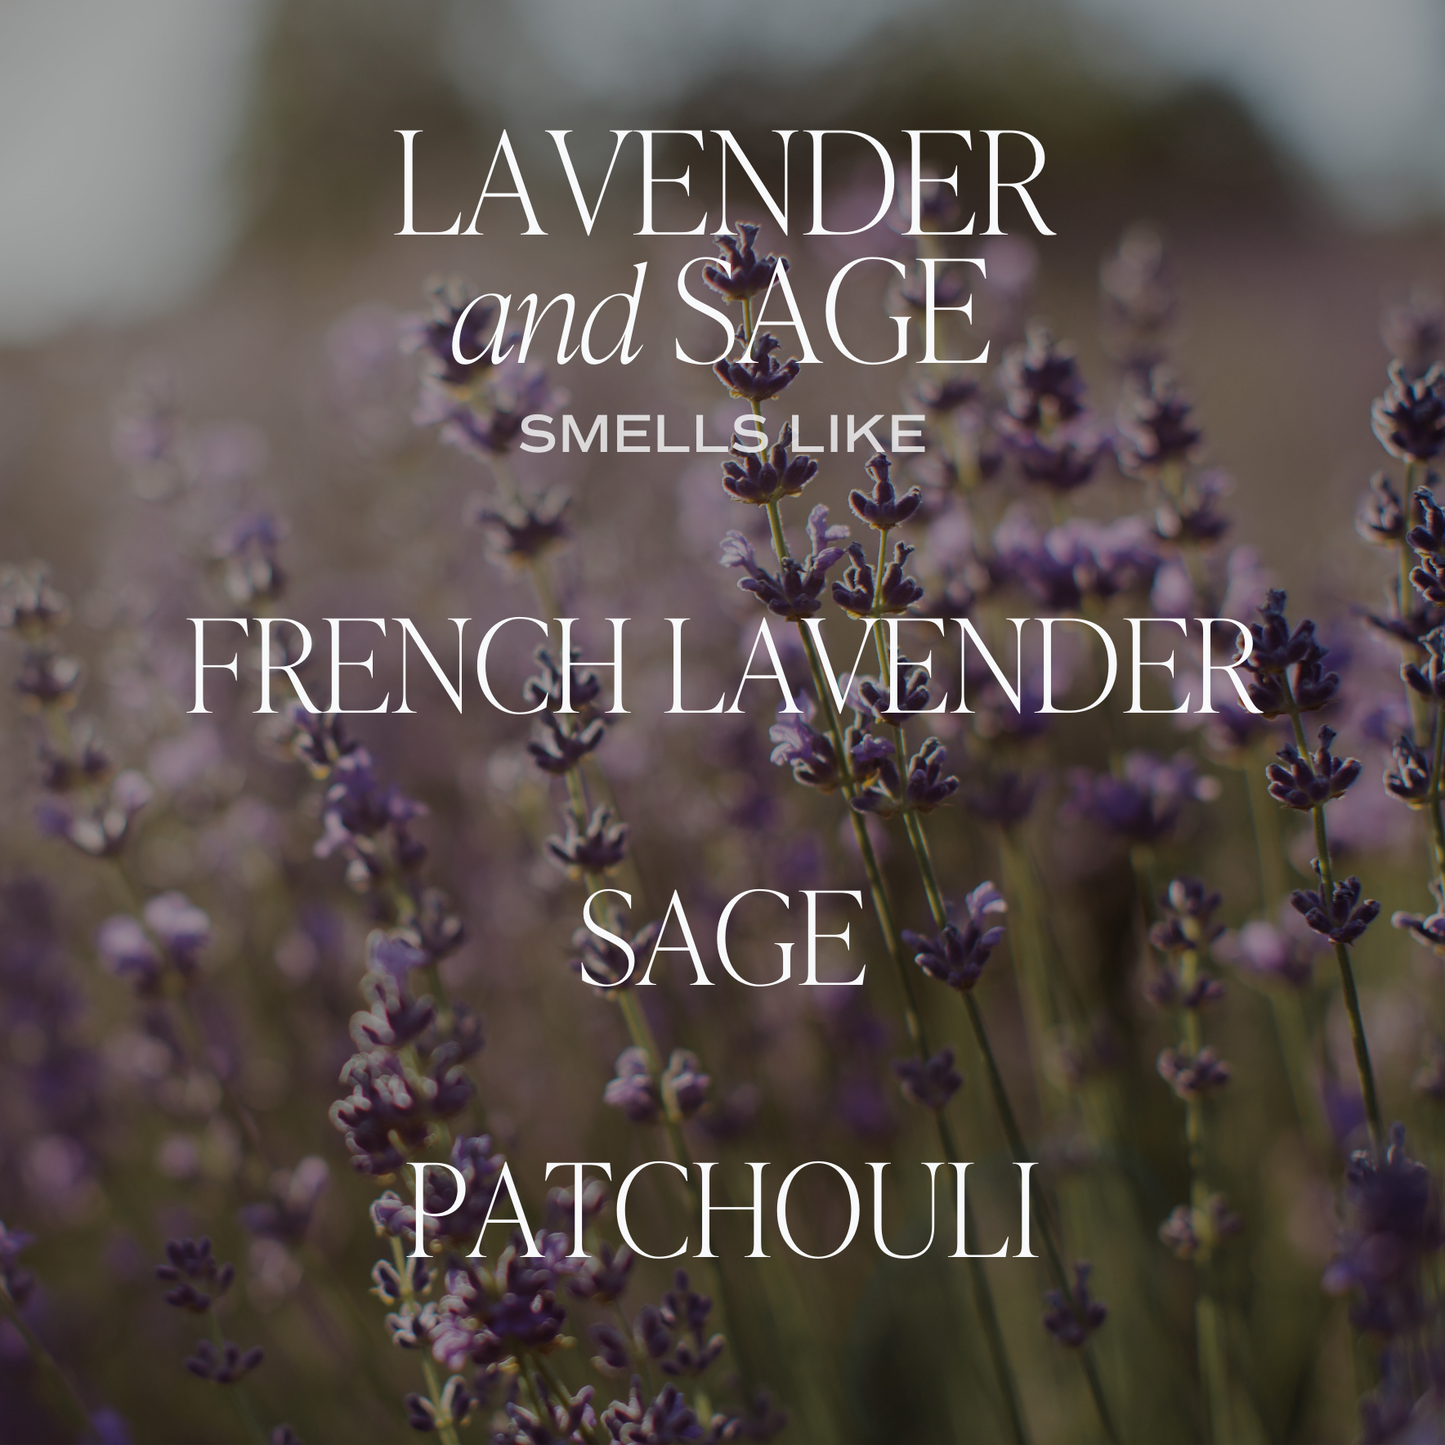 Lavender and Sage Reed Diffuser - Gifts & Home Decor